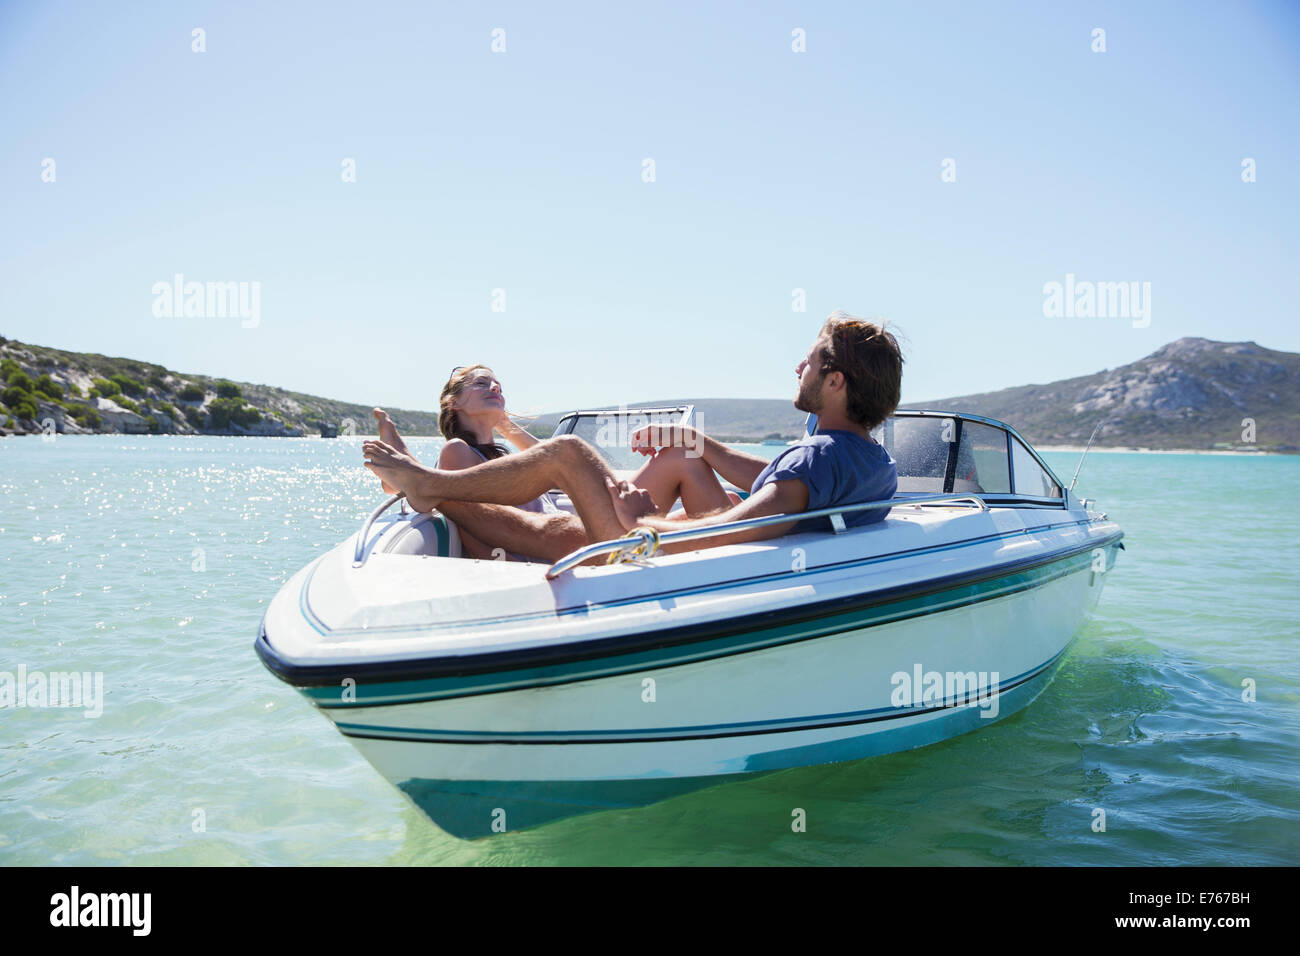 Couple sitting together in boat on water Stock Photo